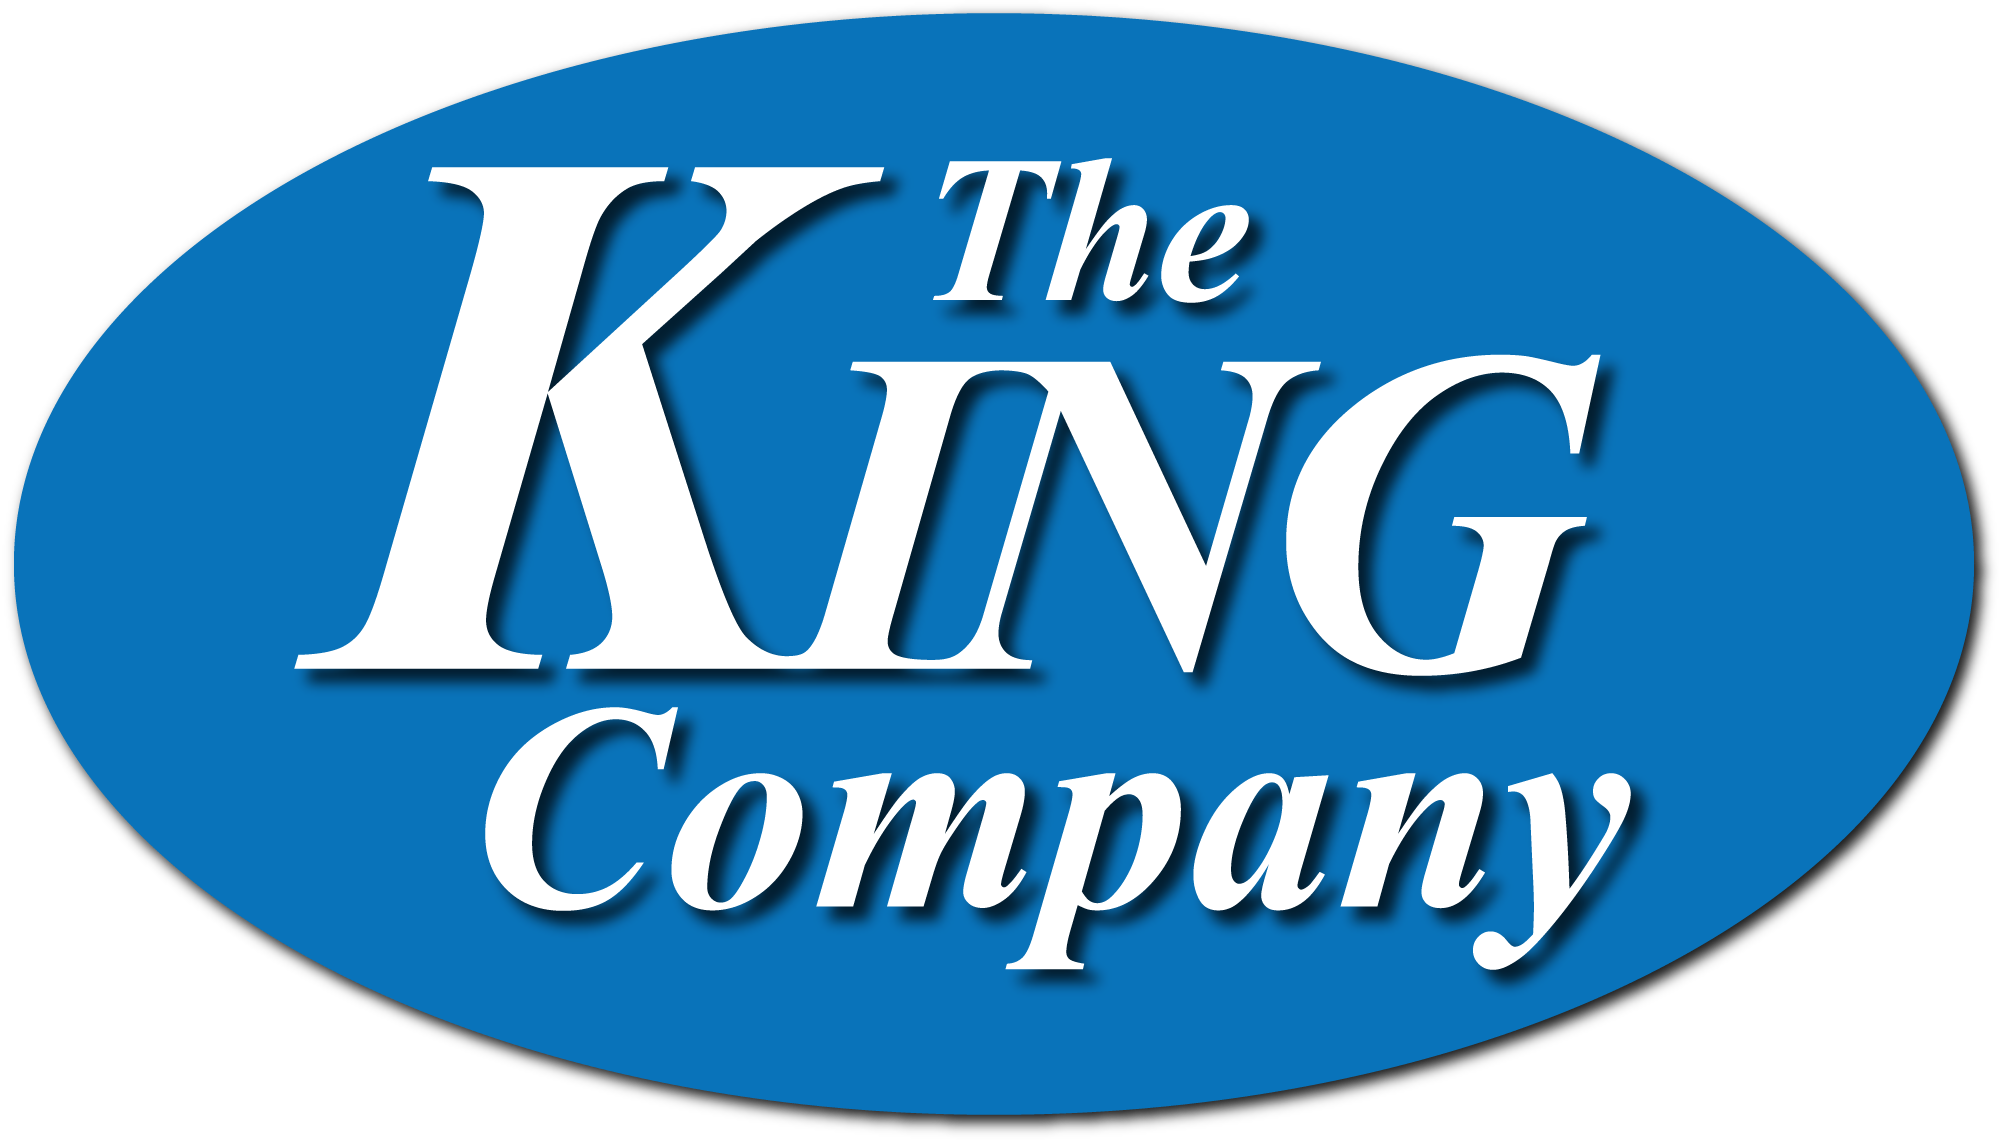 The_King_Comapy-Logo